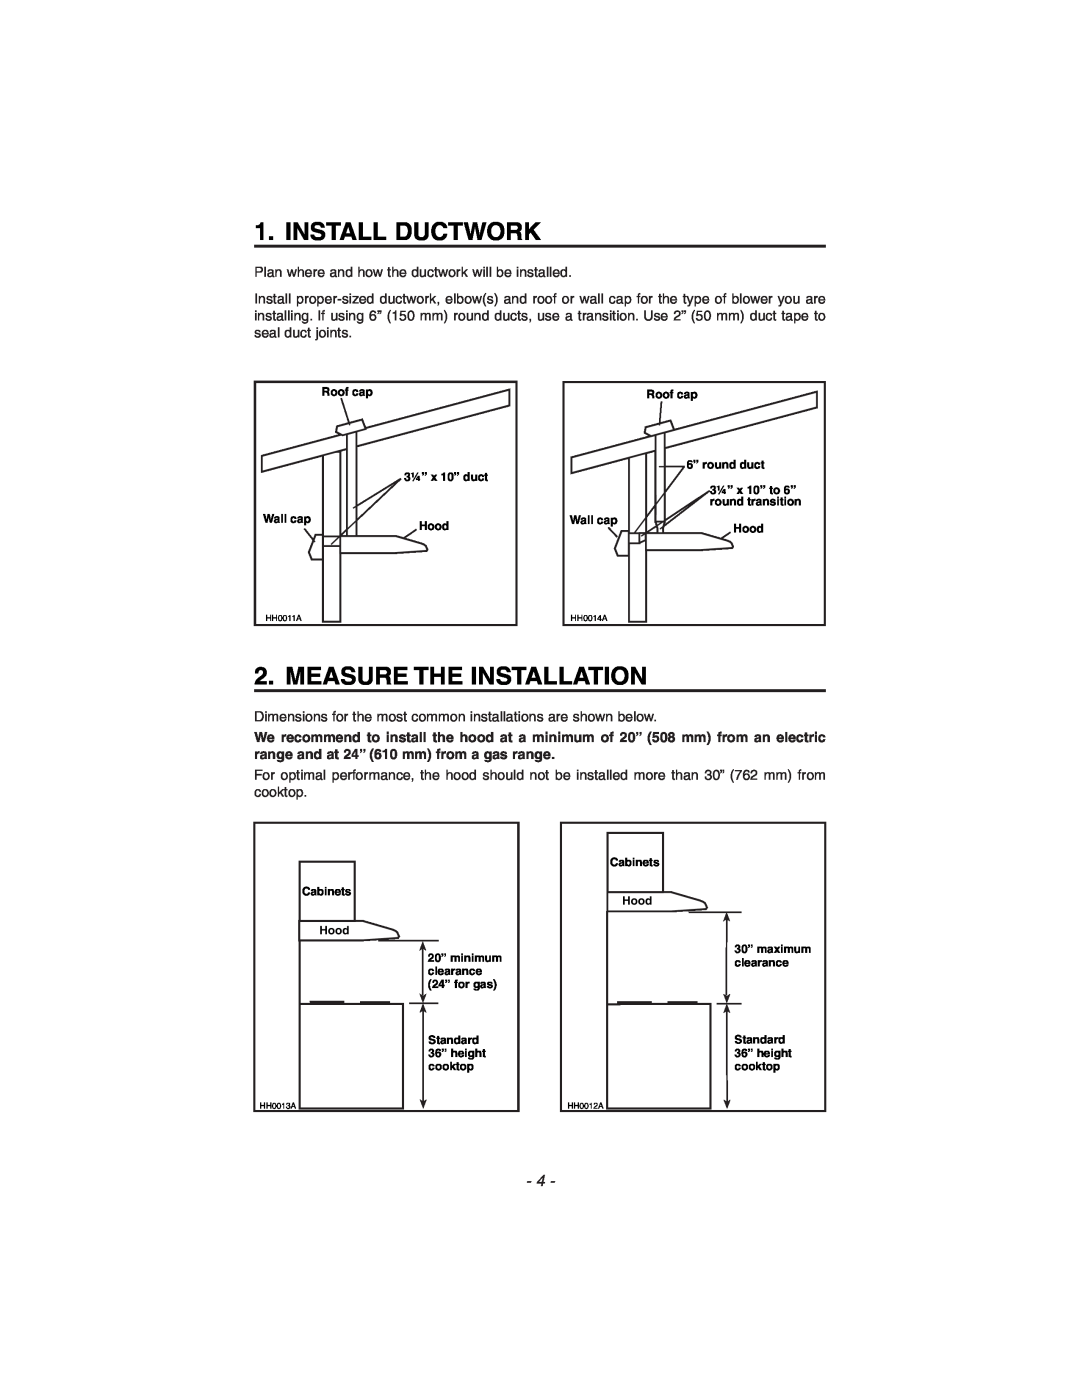 Zephyr ES1-30AW, ES1-E30AS, ES1-E30AB installation instructions Install Ductwork, Measure The Installation 